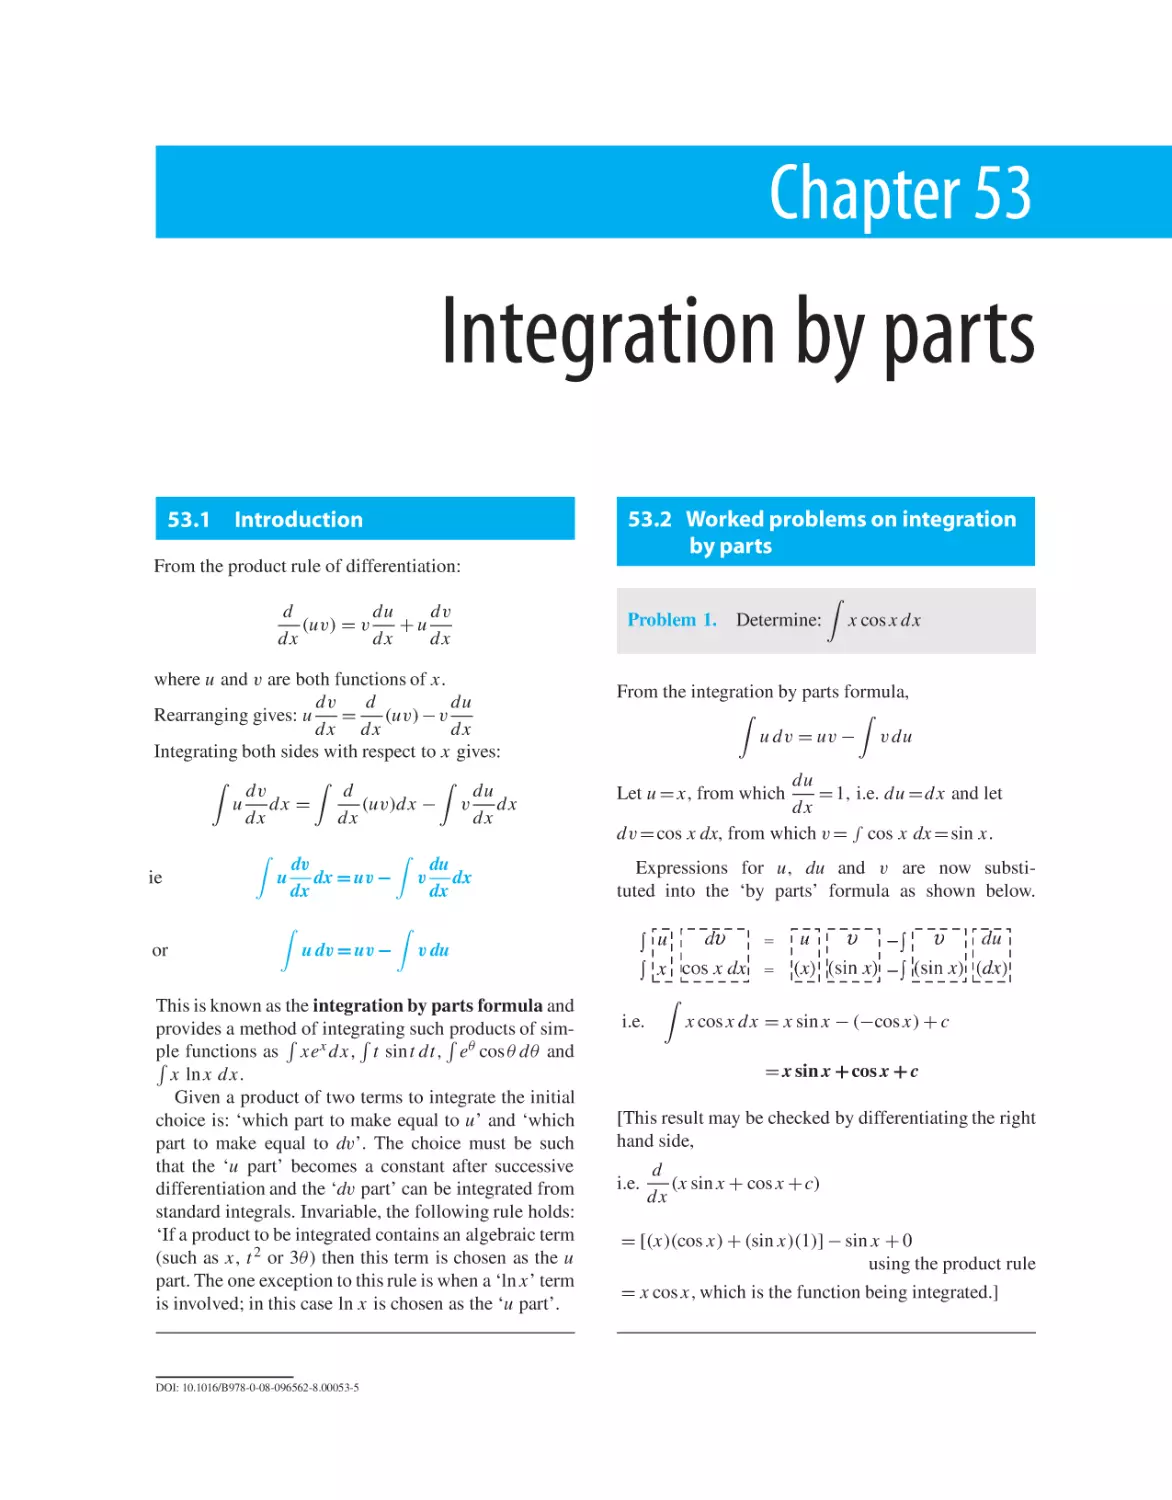 Chapter 53. Integration by parts
53.1 Introduction
53.2 Worked problems on integration by parts